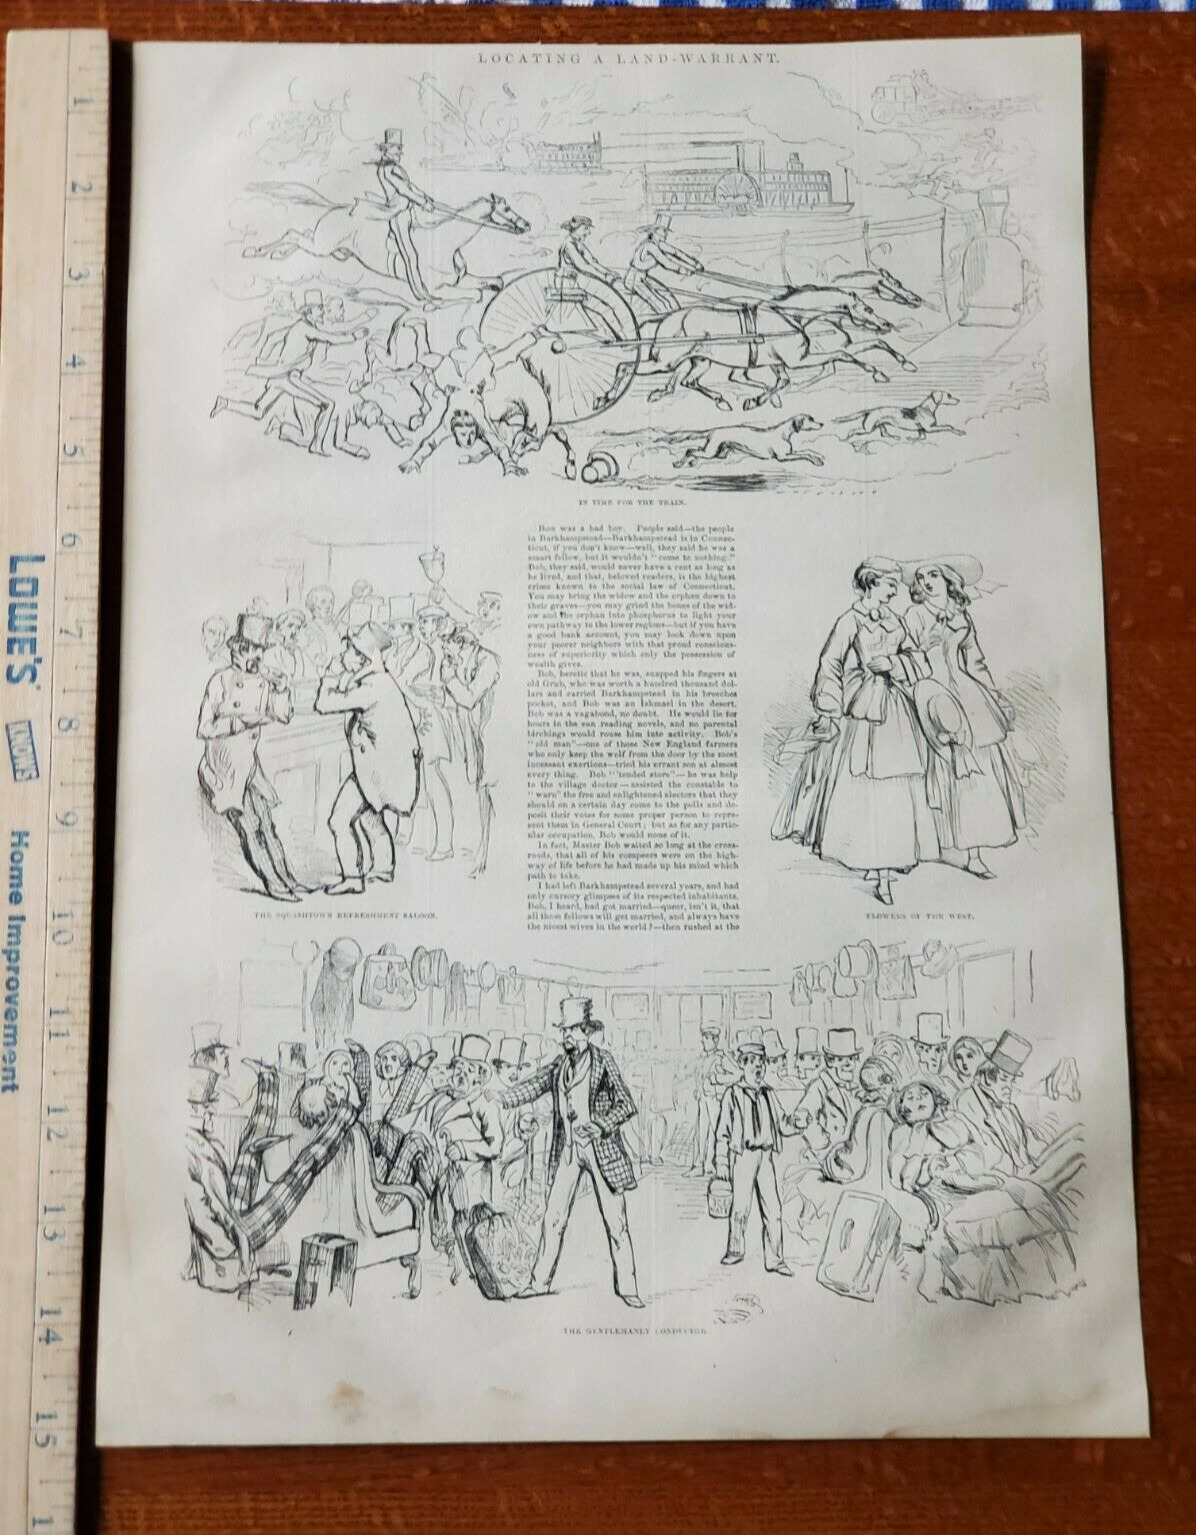 Harper's Weekly 1857 Sketch Print LOCATING A LAND WARRANT